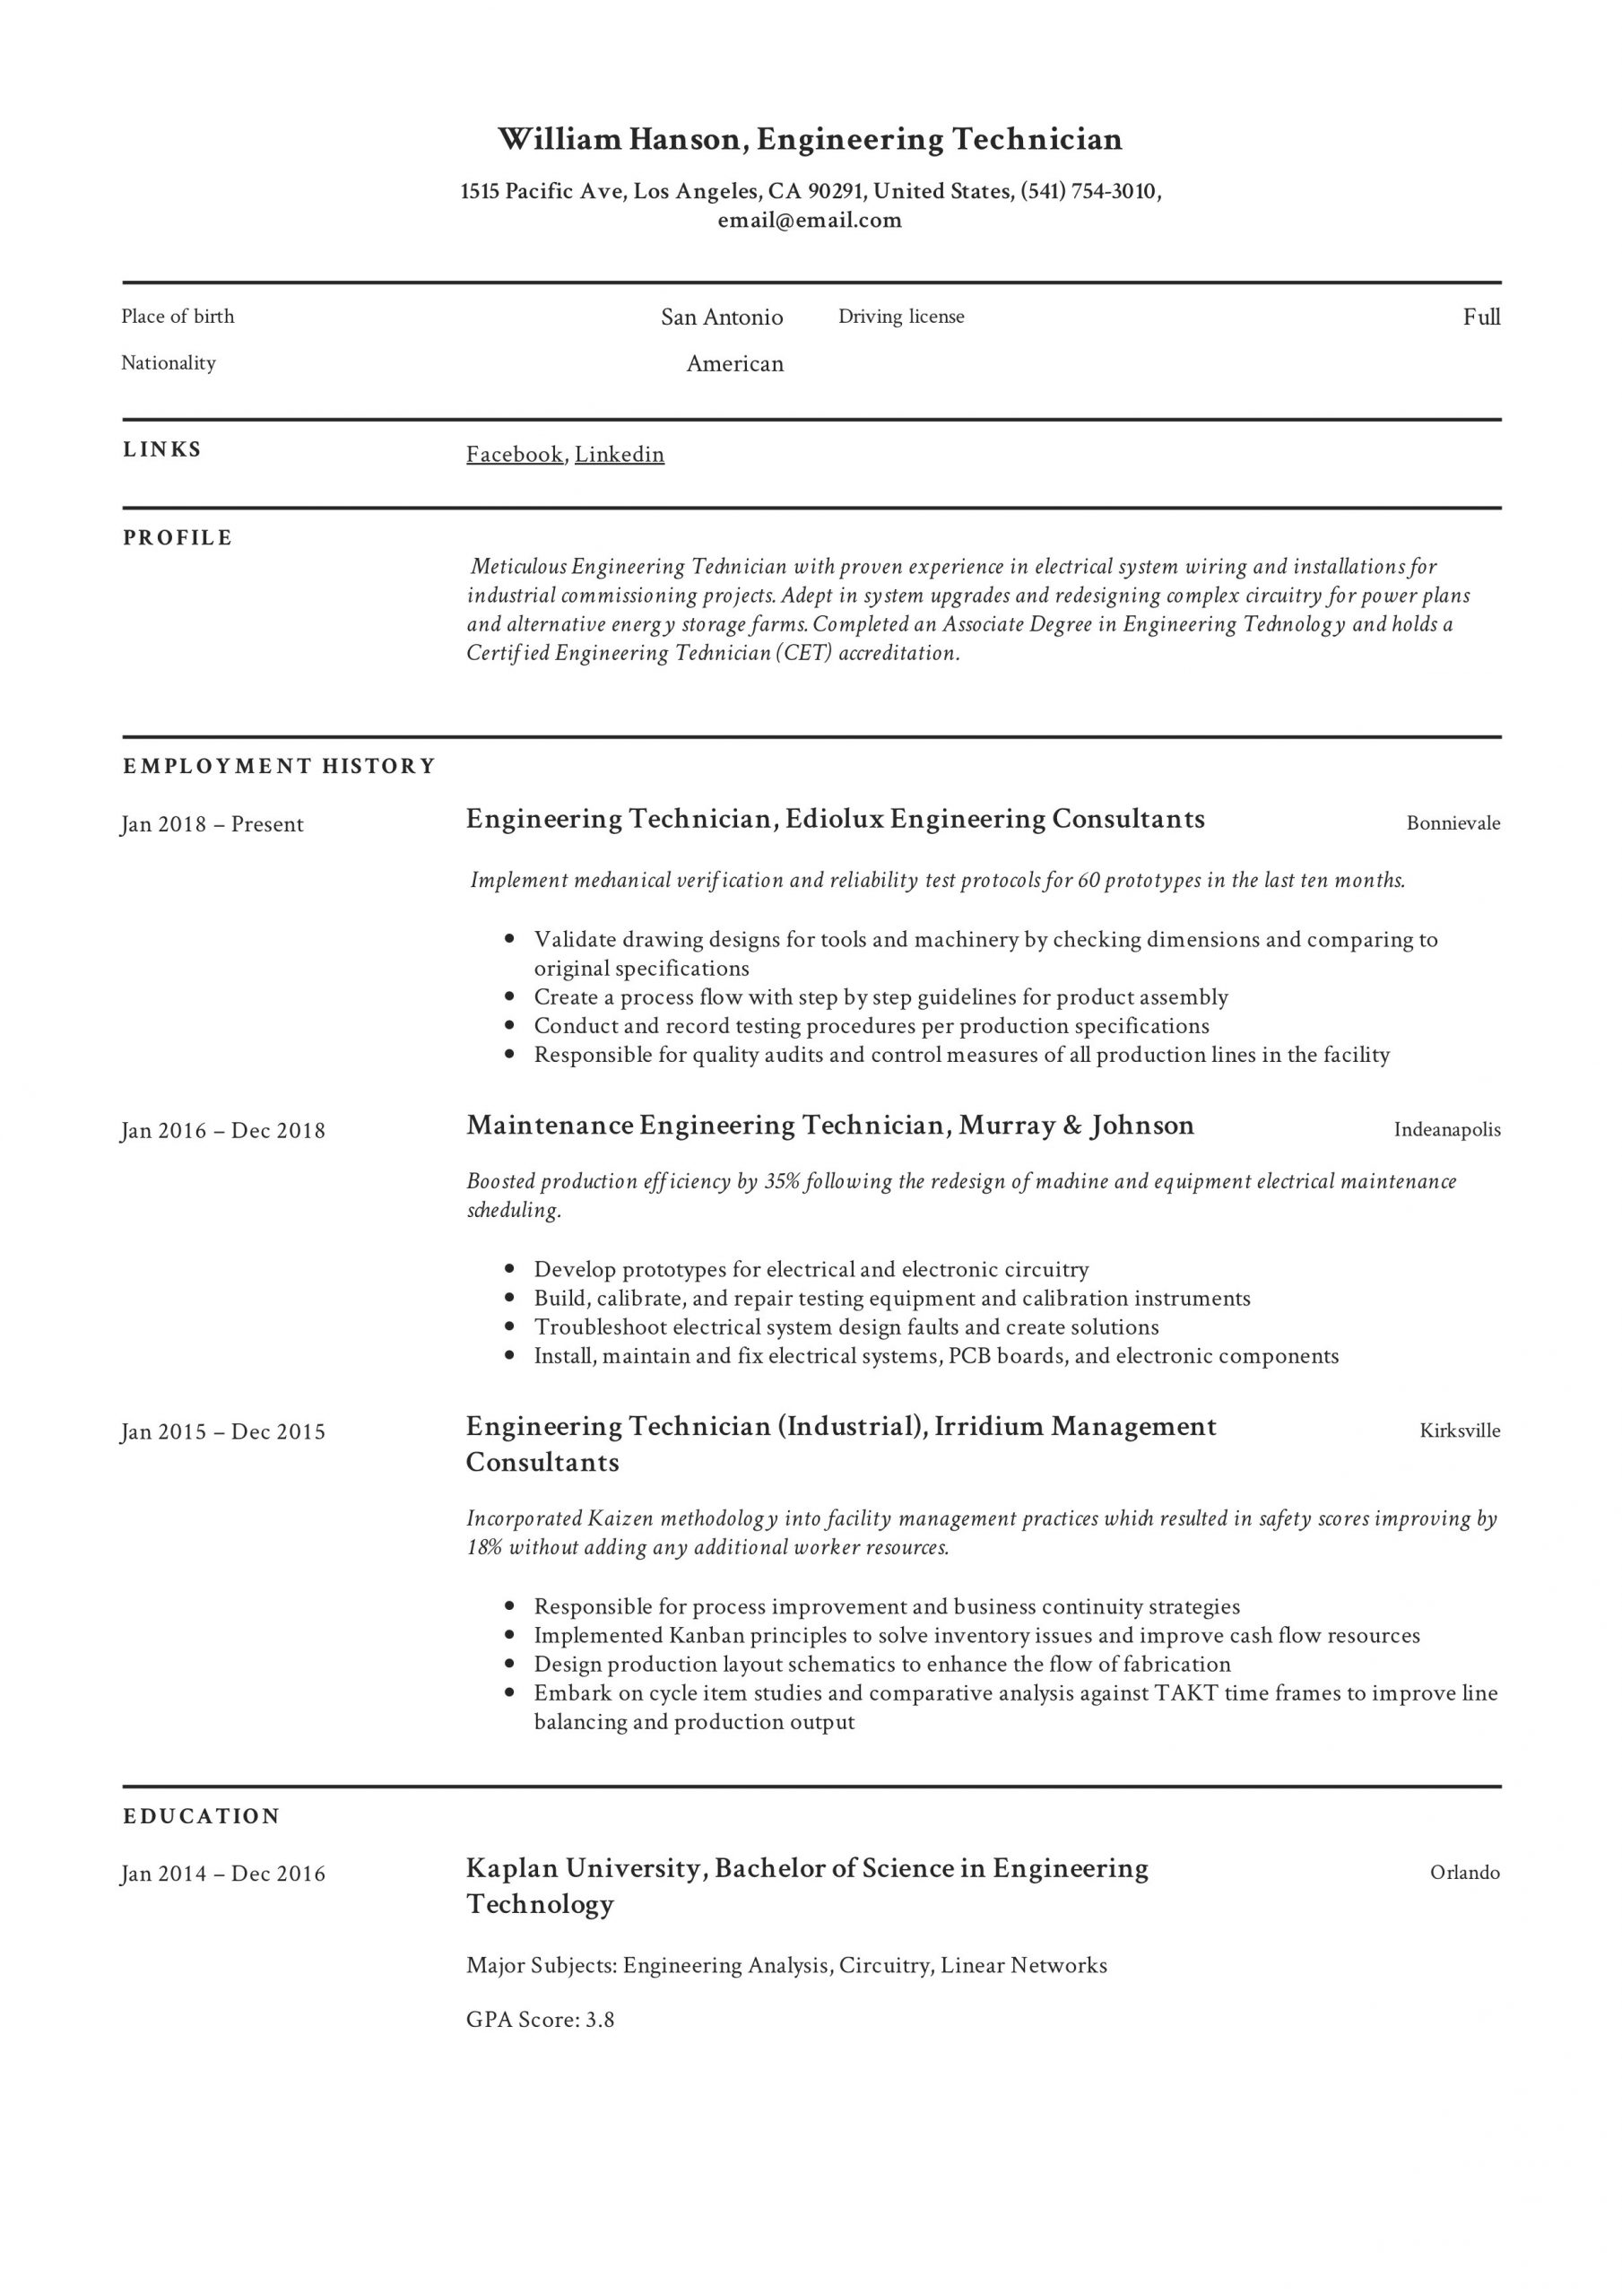 Sample Resume for Pharmaceutical Manufacturing Technician Engineering Technician Resume & Writing Guide  12 Templates 2020